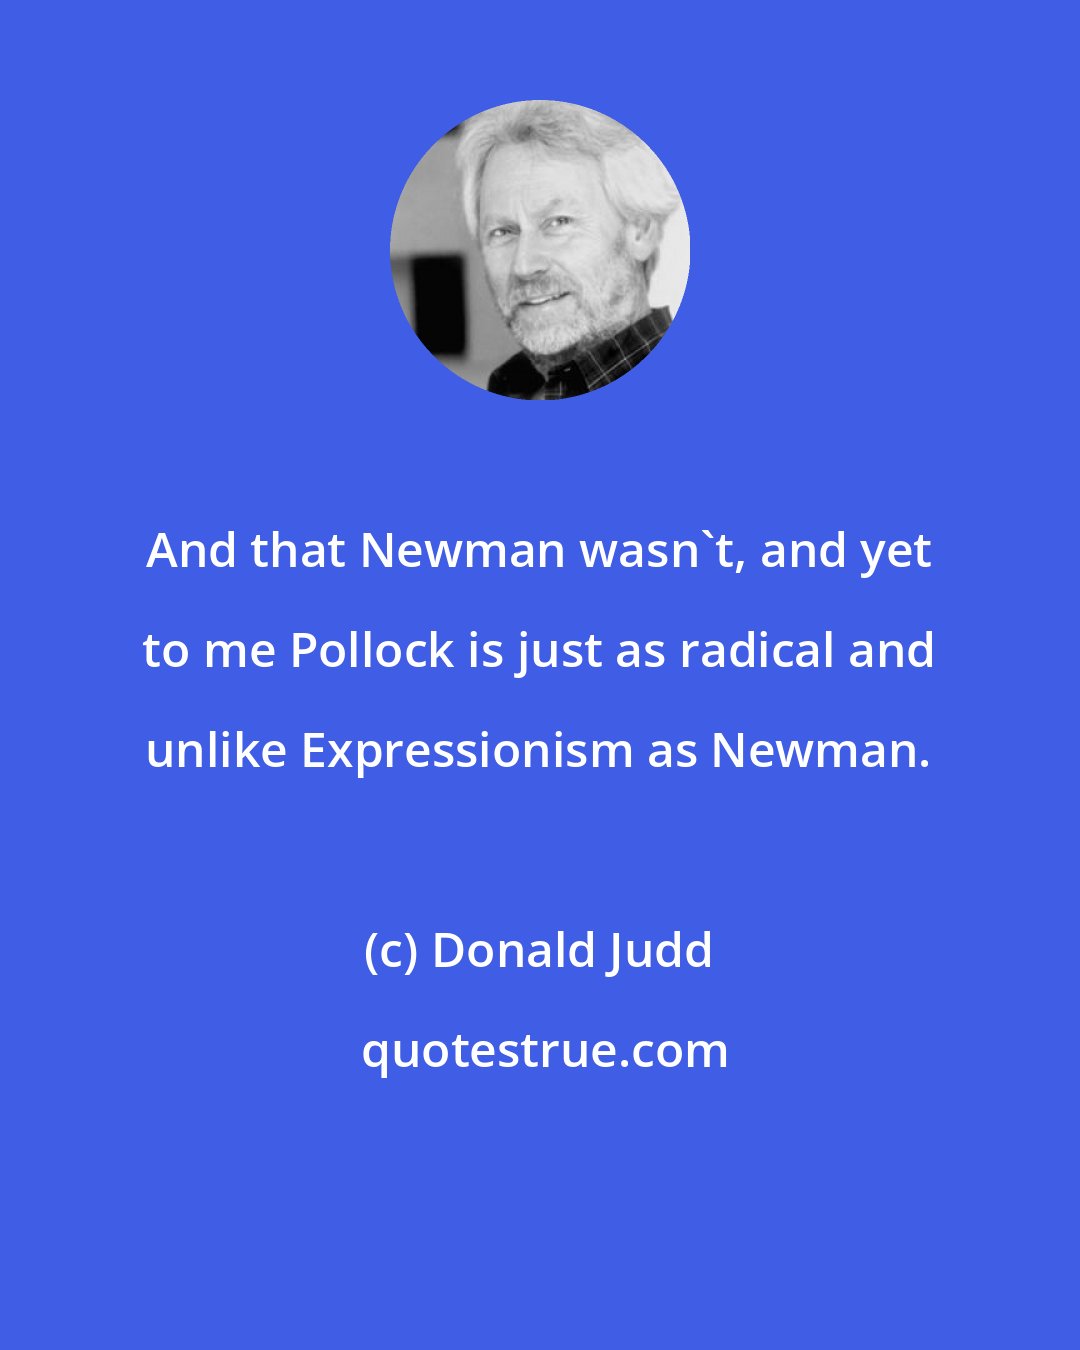 Donald Judd: And that Newman wasn't, and yet to me Pollock is just as radical and unlike Expressionism as Newman.